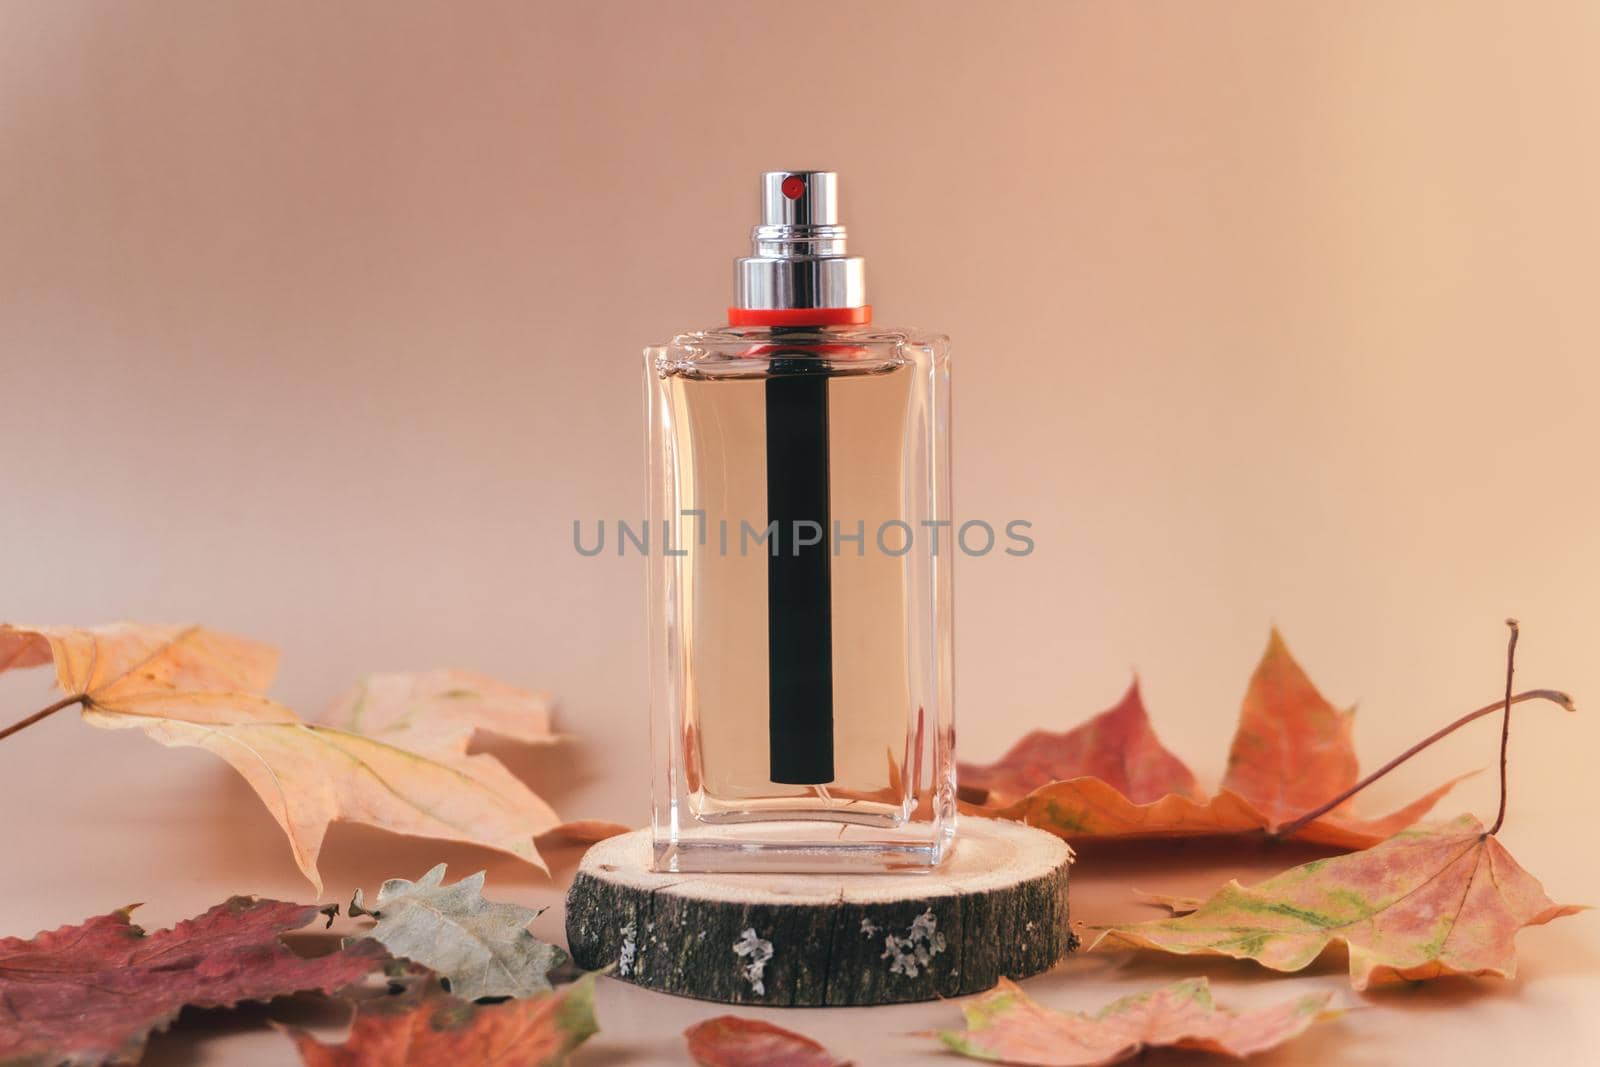 Transparent glass perfume bottle on wooden podium with yellow leaves. Autumn concept by lavsketch